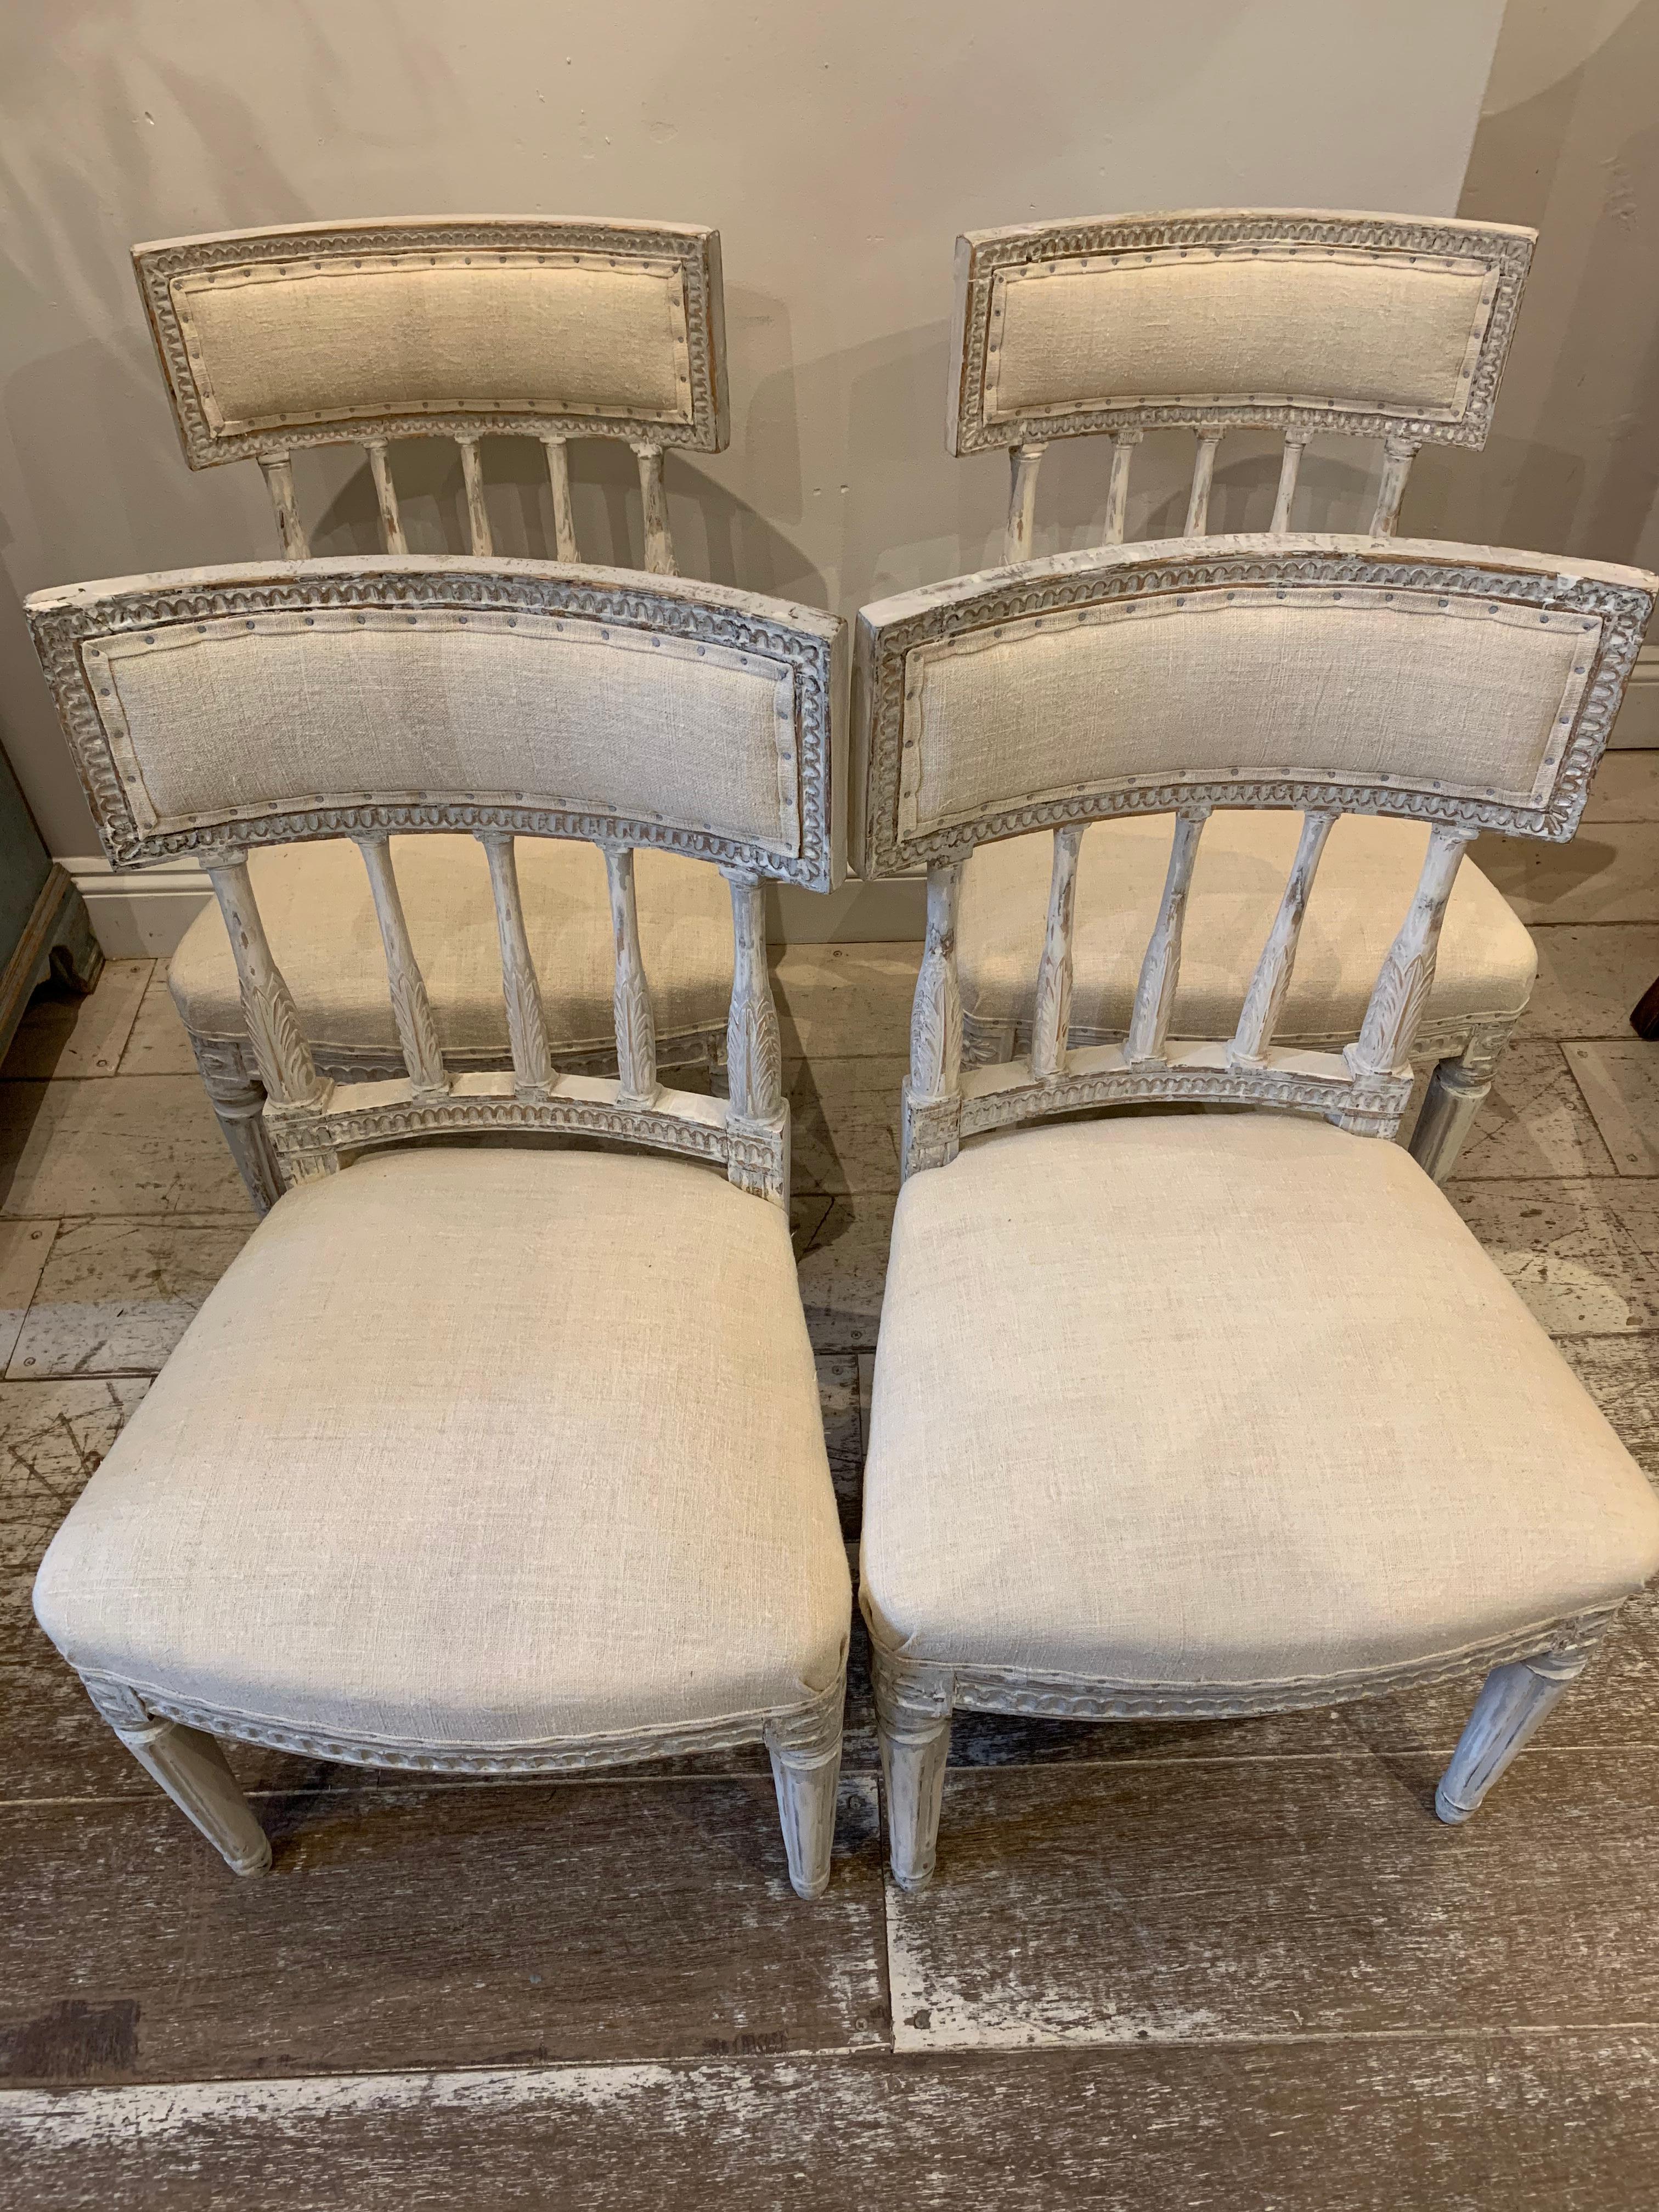 Painted Set of 4 Circa 1800s Swedish Gustavian Dining Chairs Anders Hellman Style